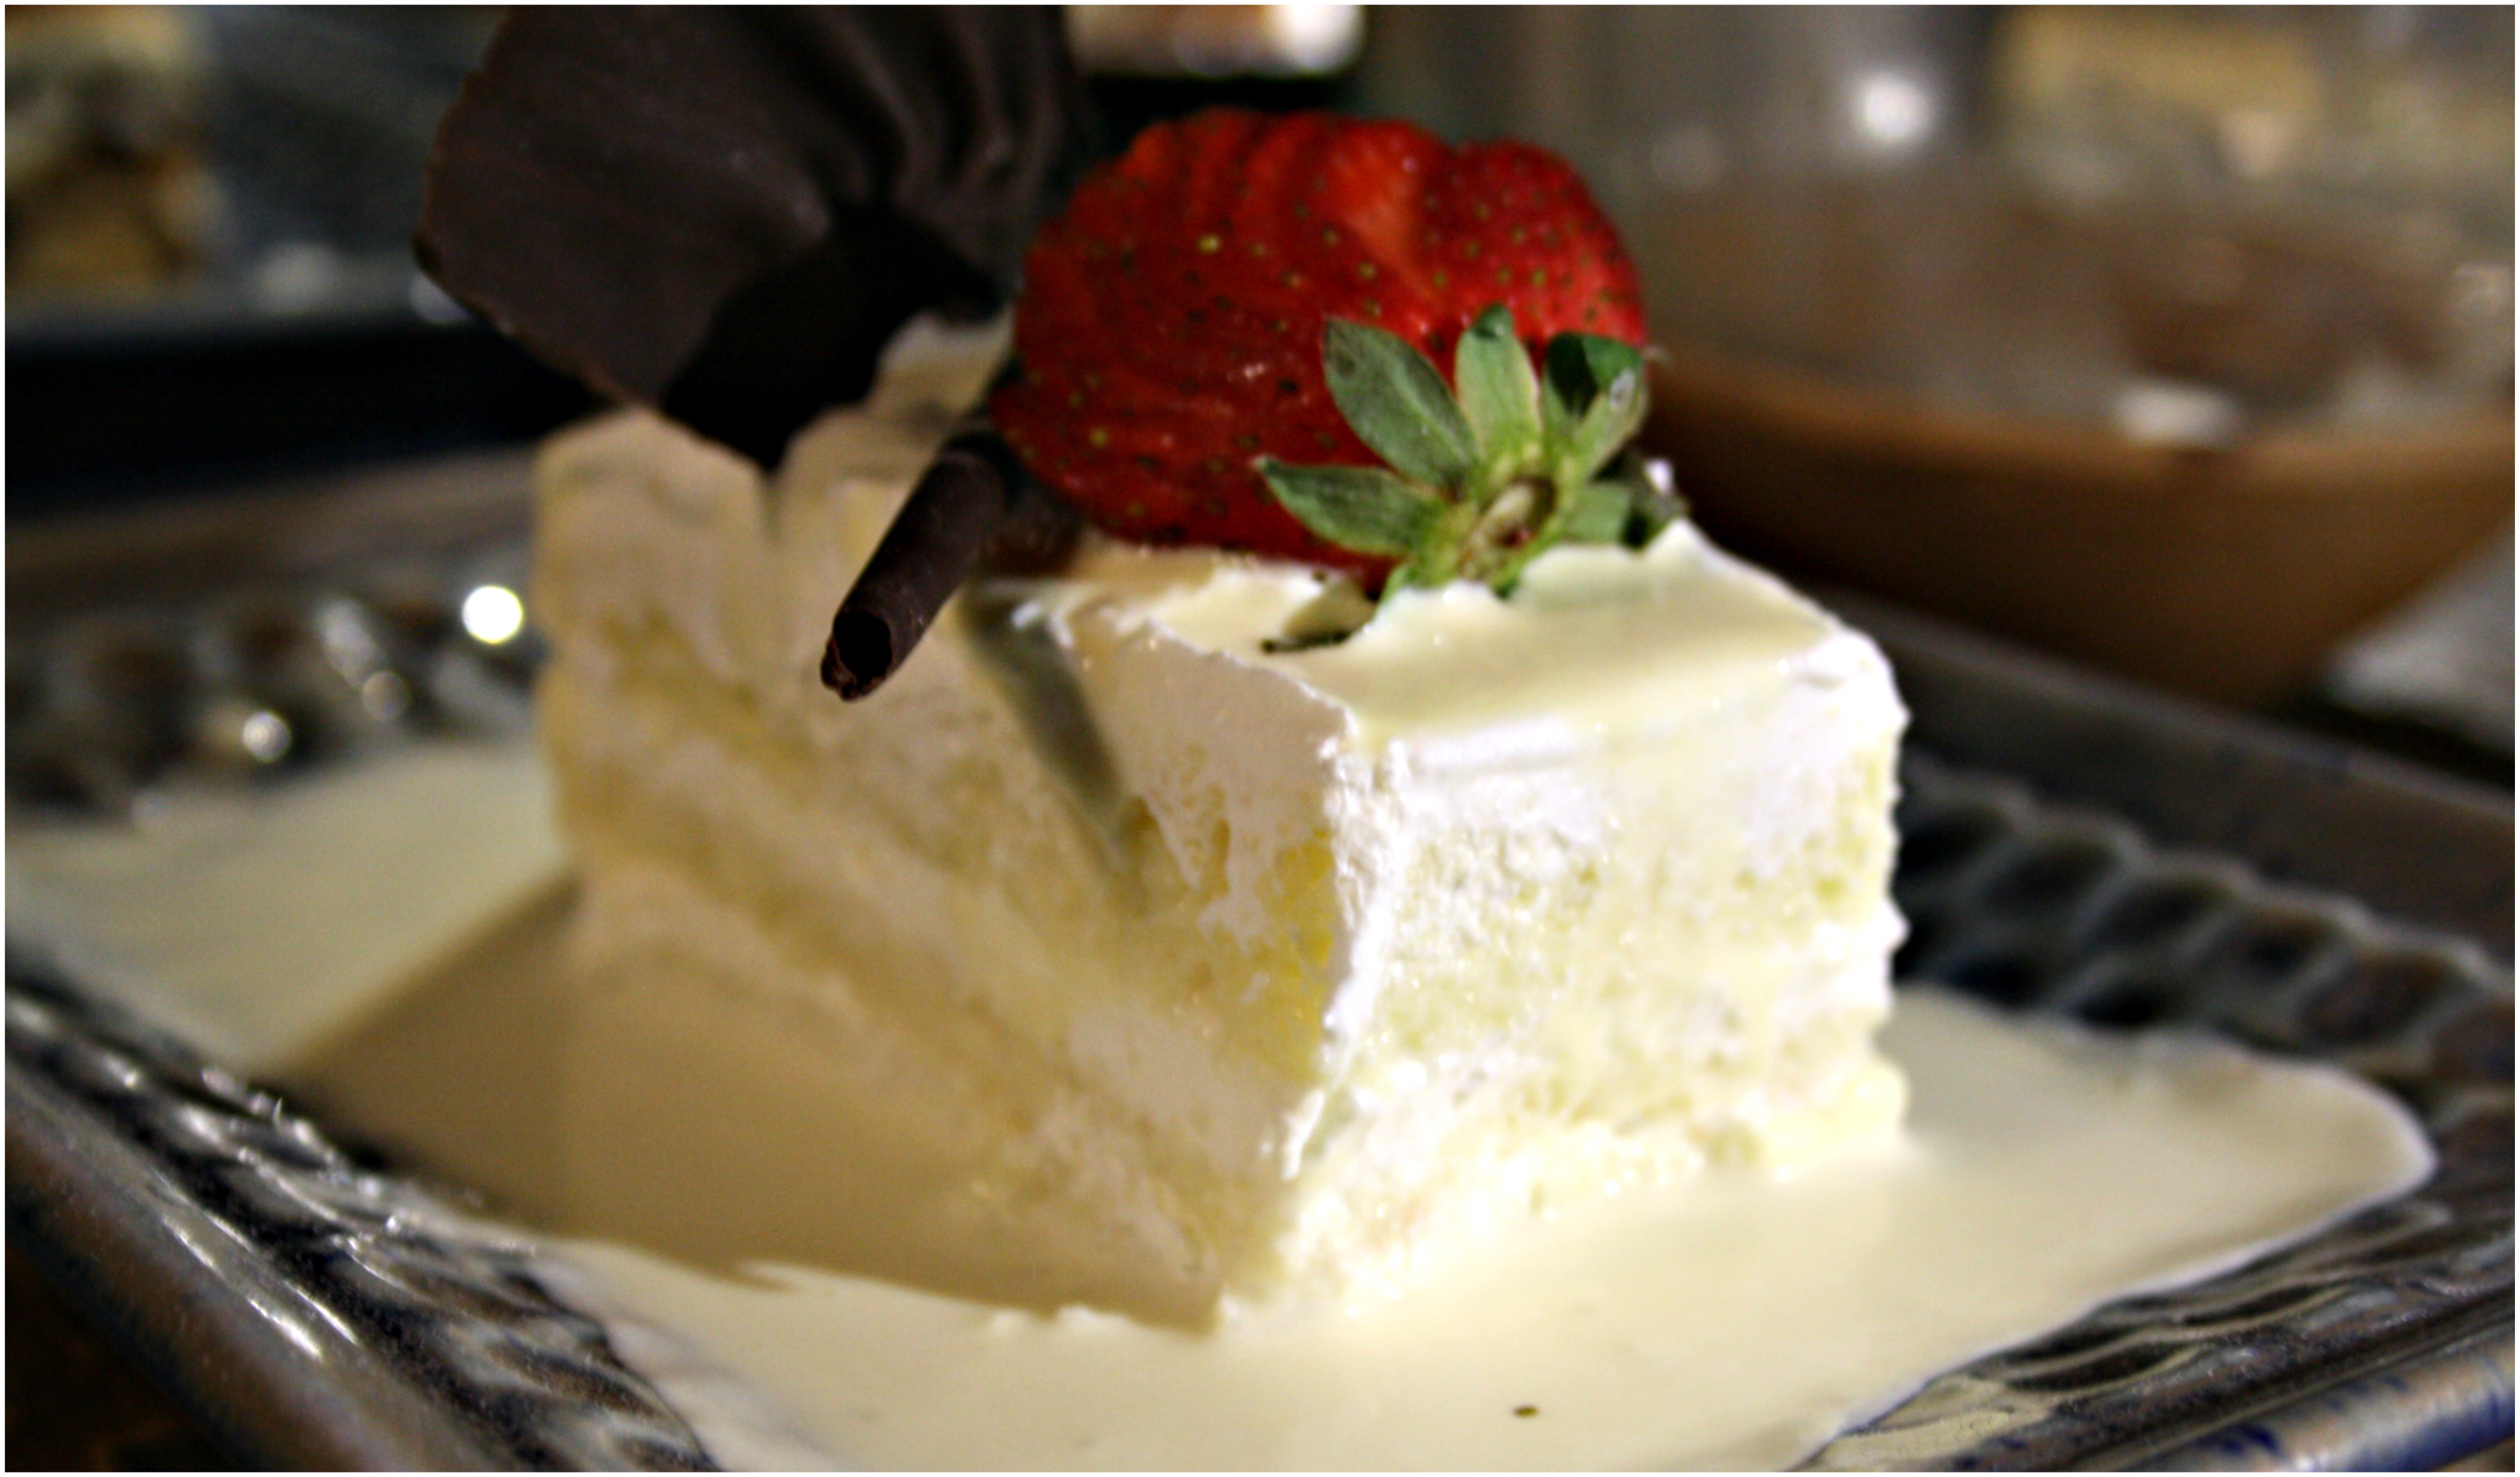 The Tres Leches Cake